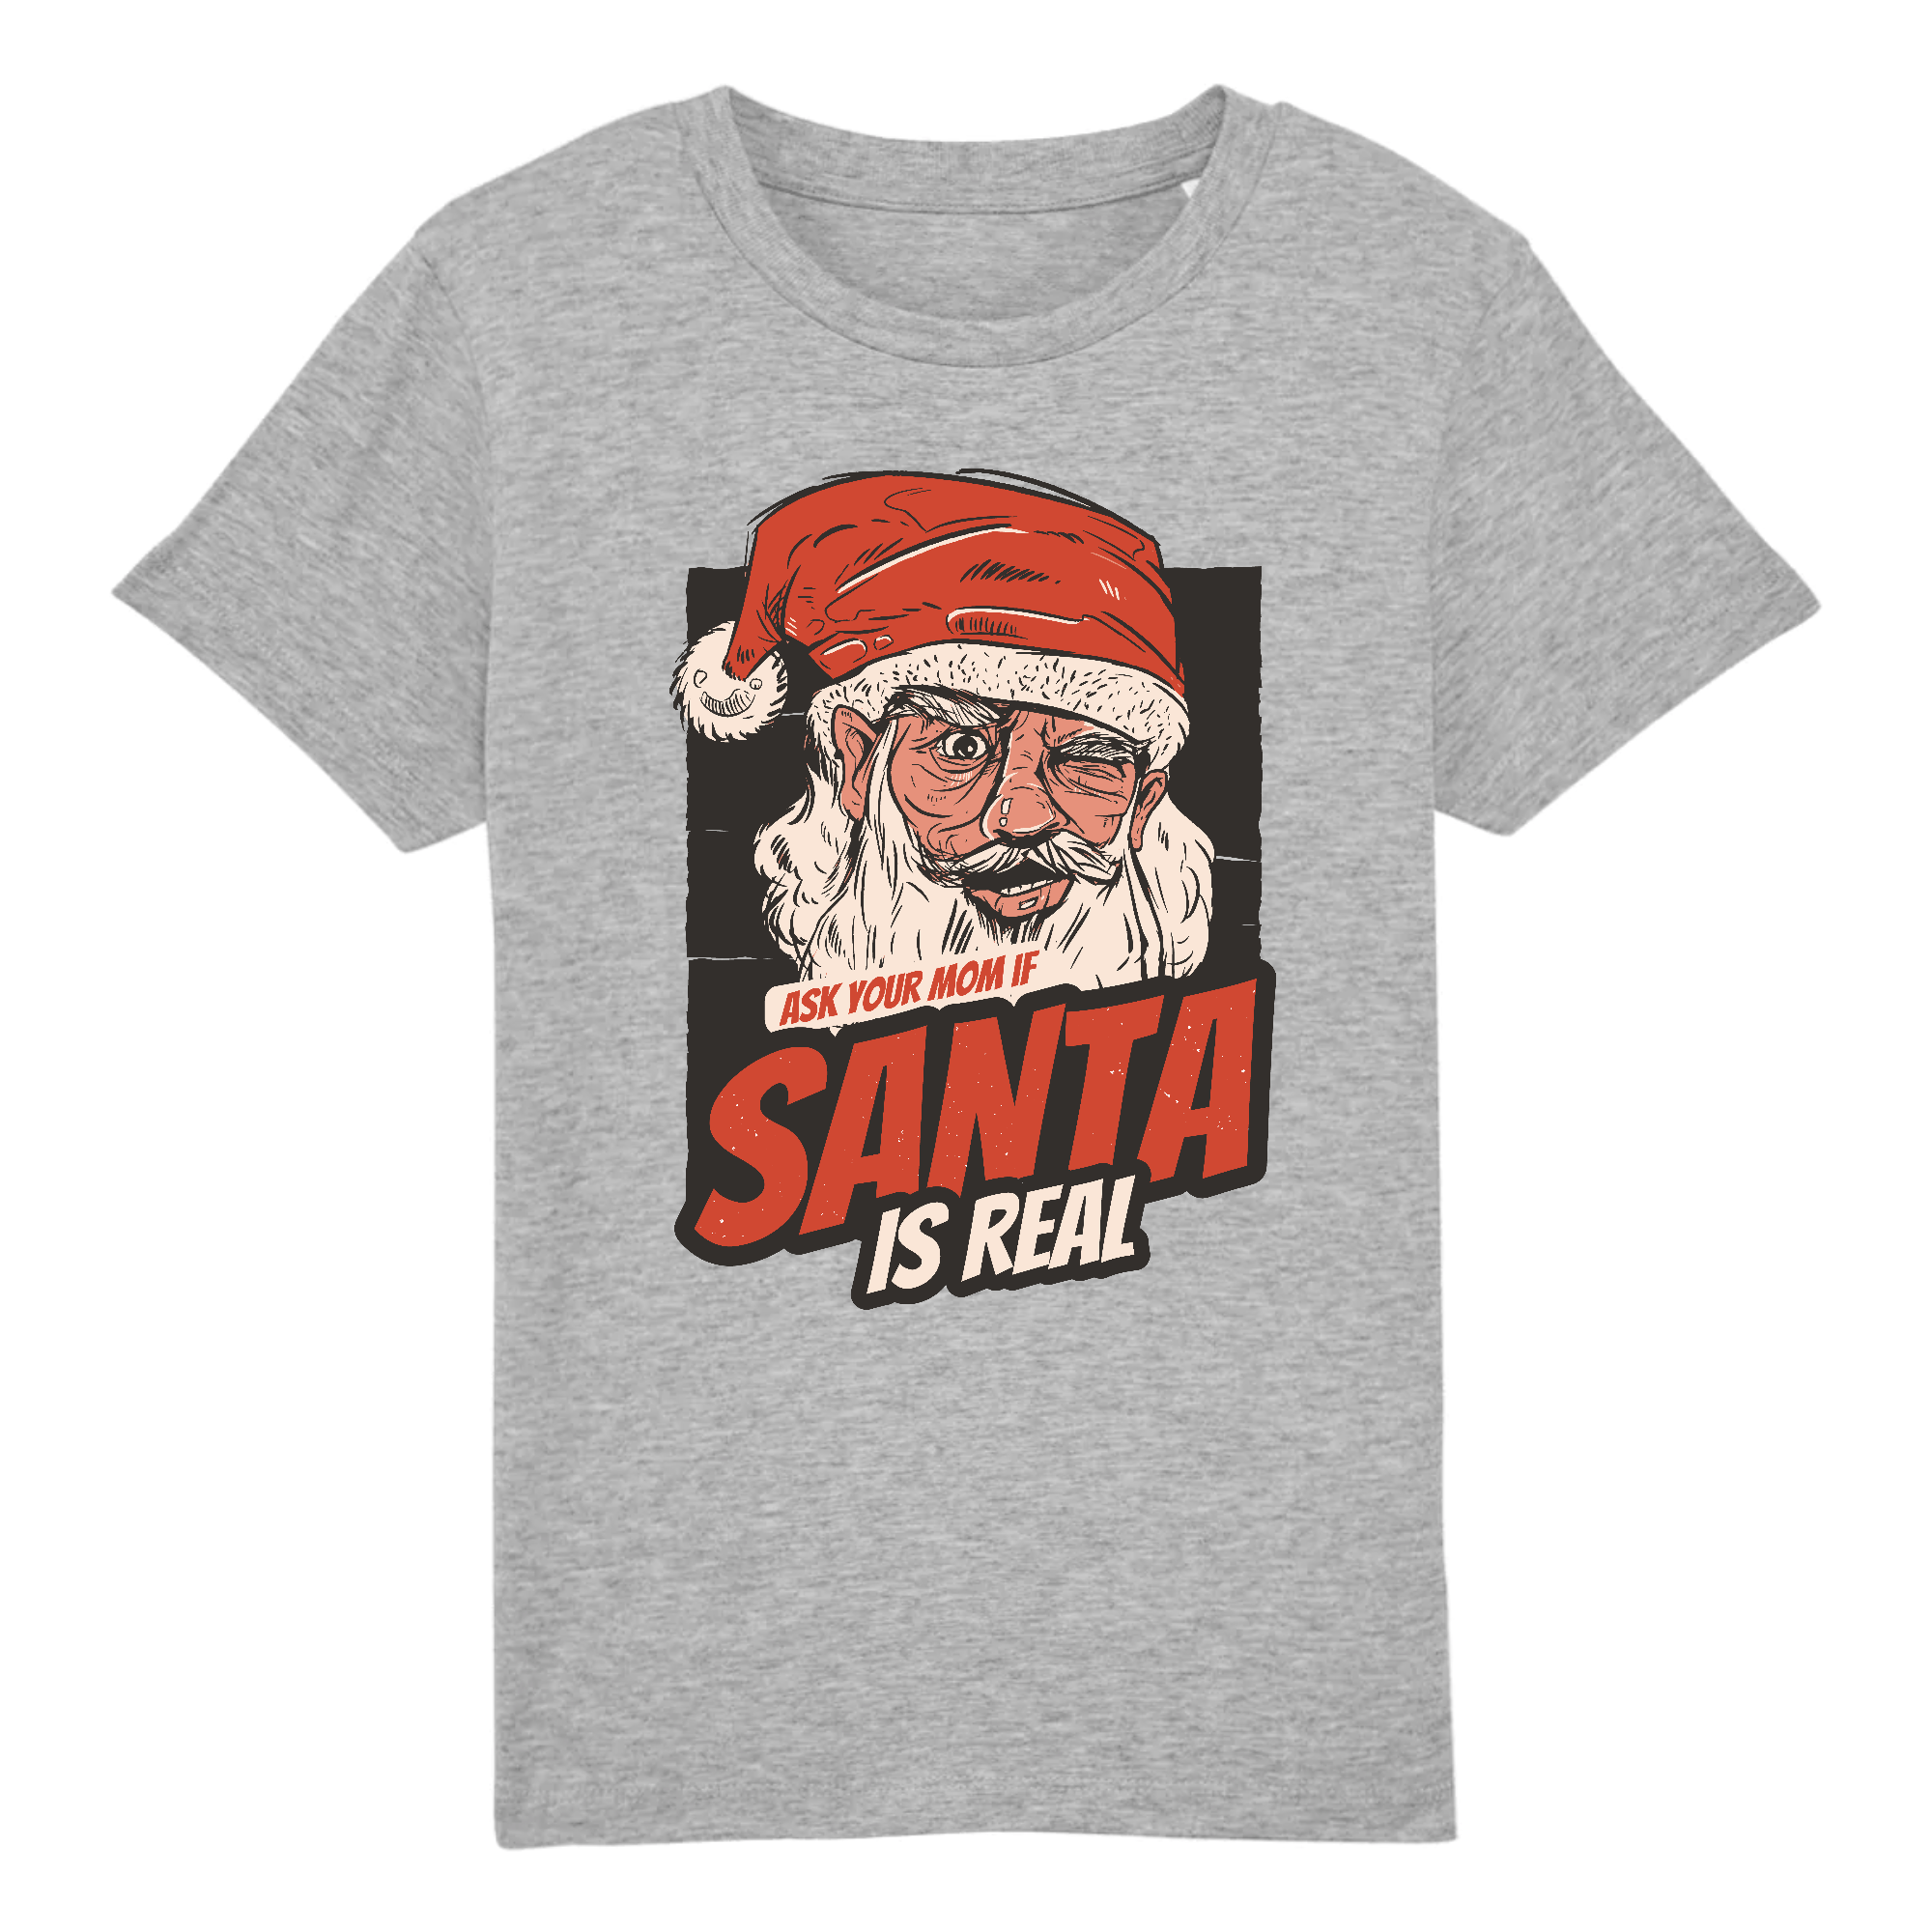 T-shirt Noël enfant - ASK YOUR MOM IF SANTA IS REAL